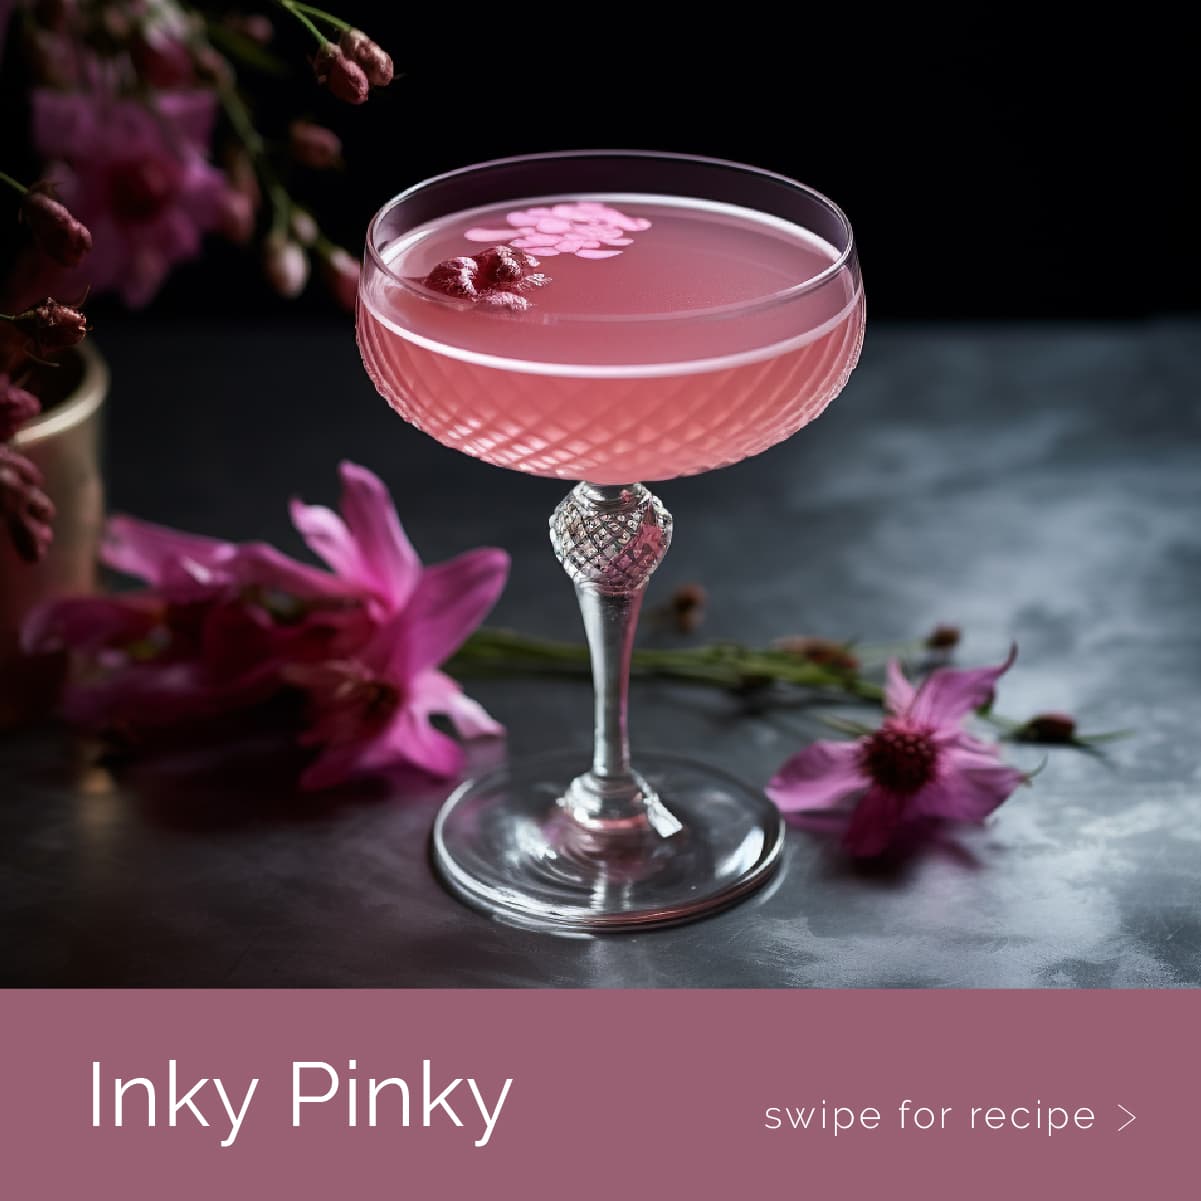 An Inky Pinky cocktail